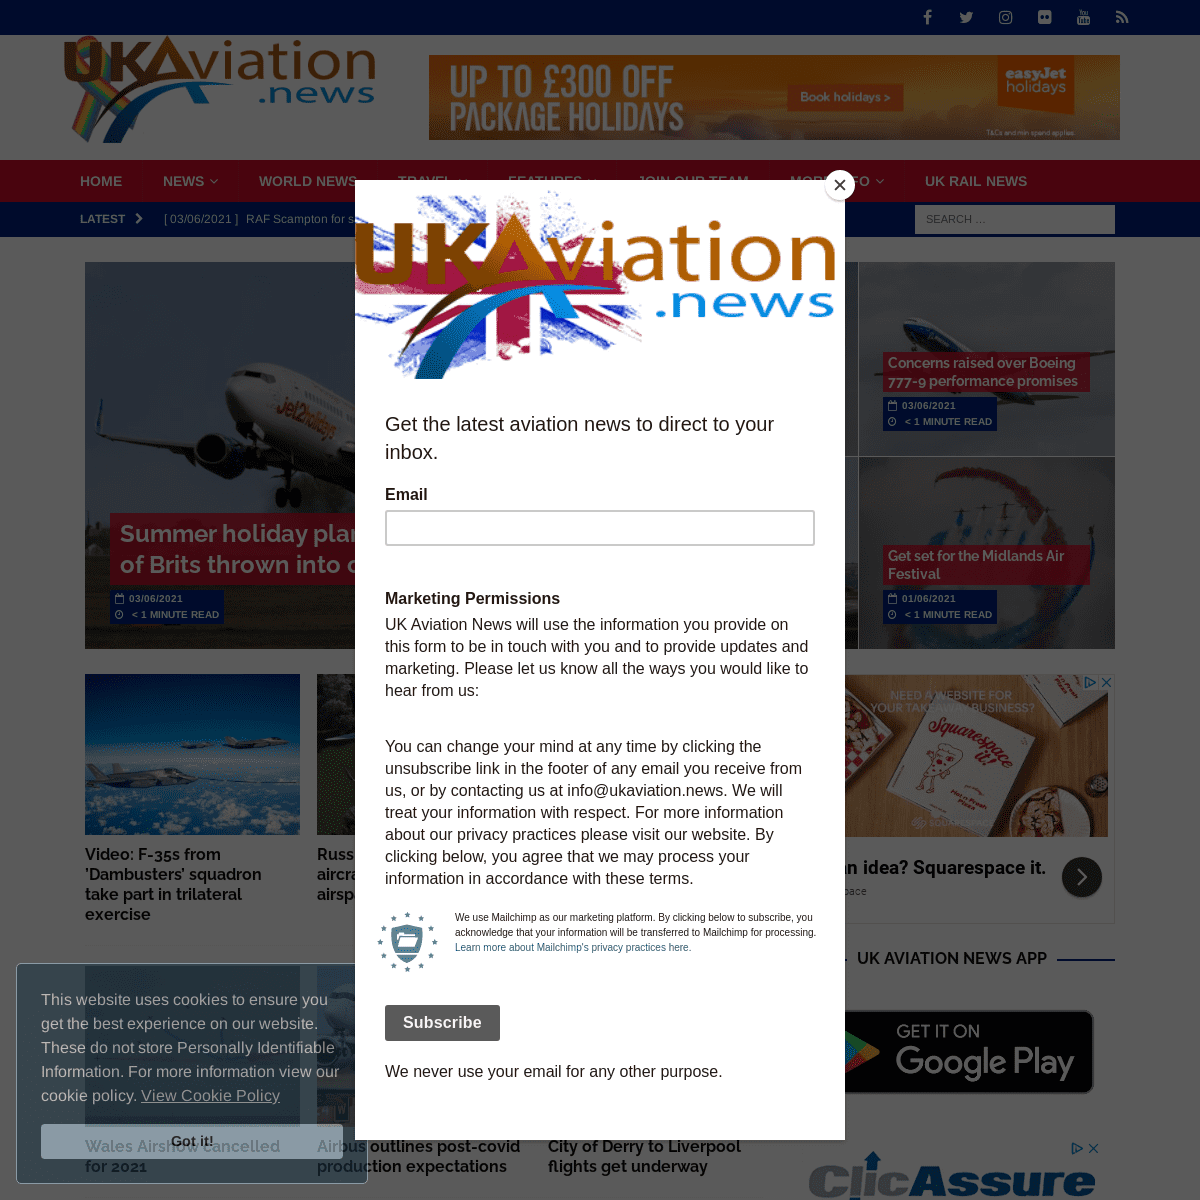 A complete backup of https://ukaviation.news